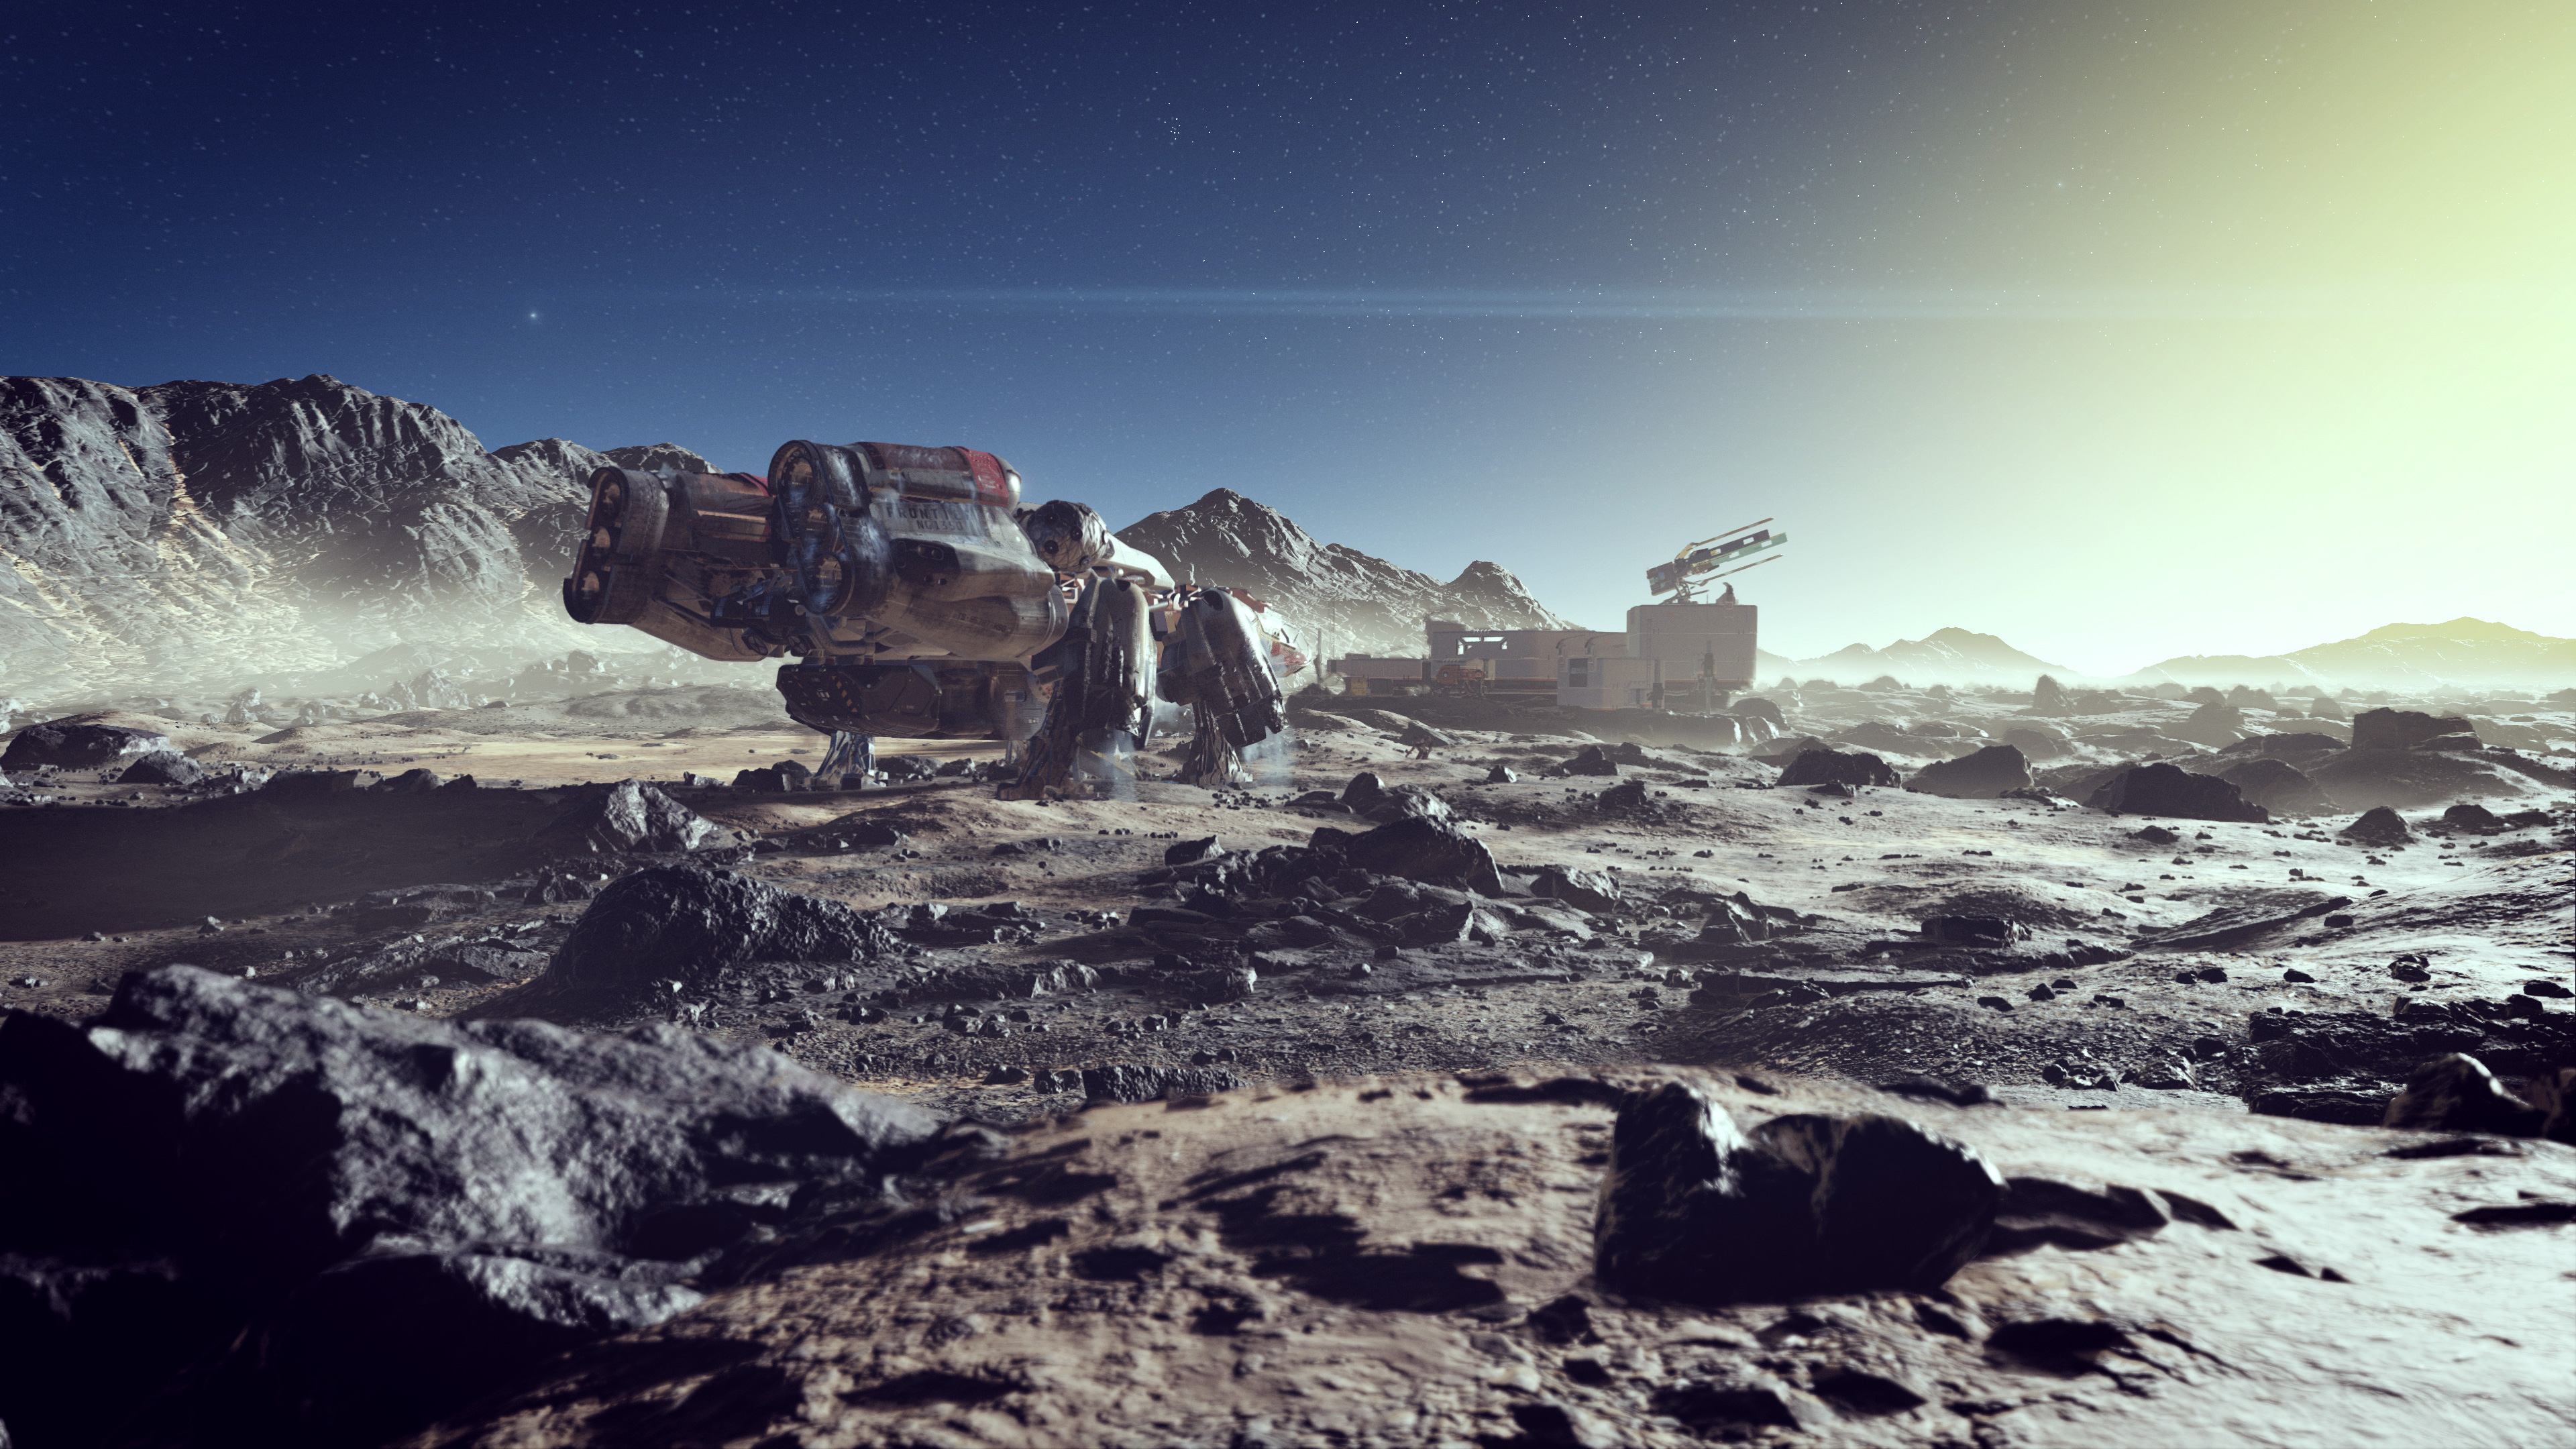 a large spacecraft marked “NG1350” with a base behind it, sitting on the rocky surface of a planet in Starfield